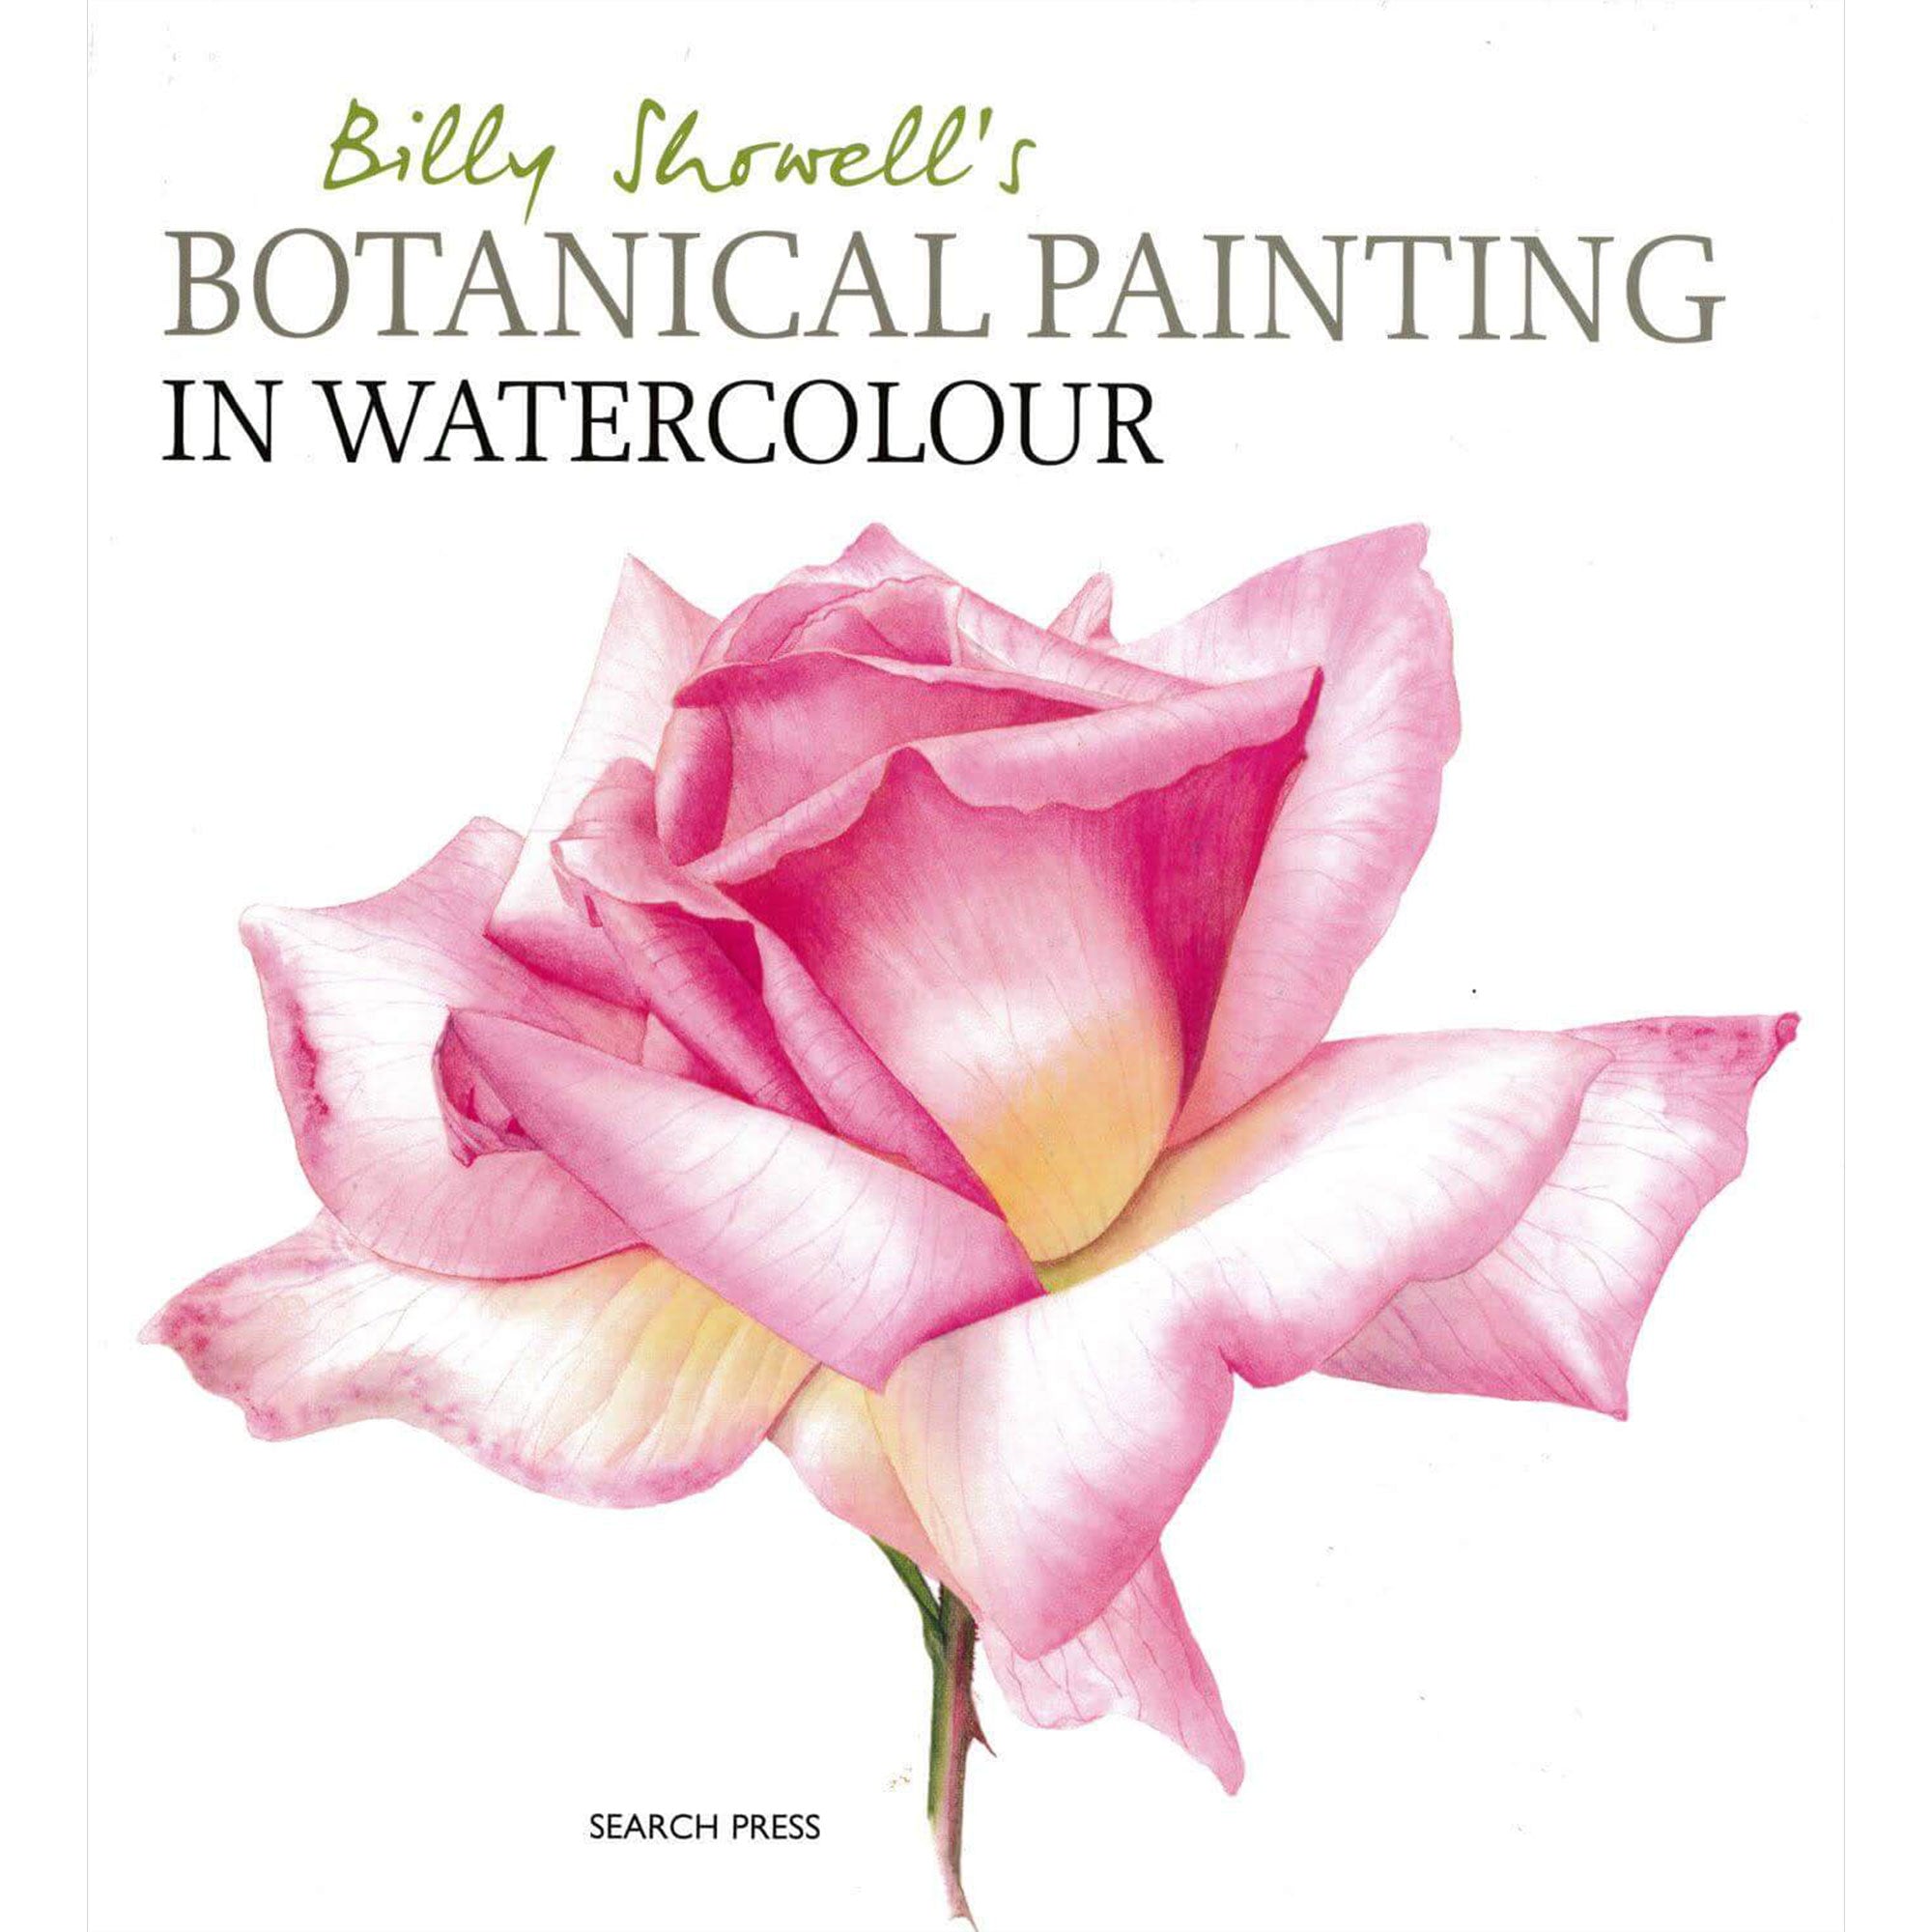 Billy Showell's Botanical Painting in Watercolour - B. Showell cover